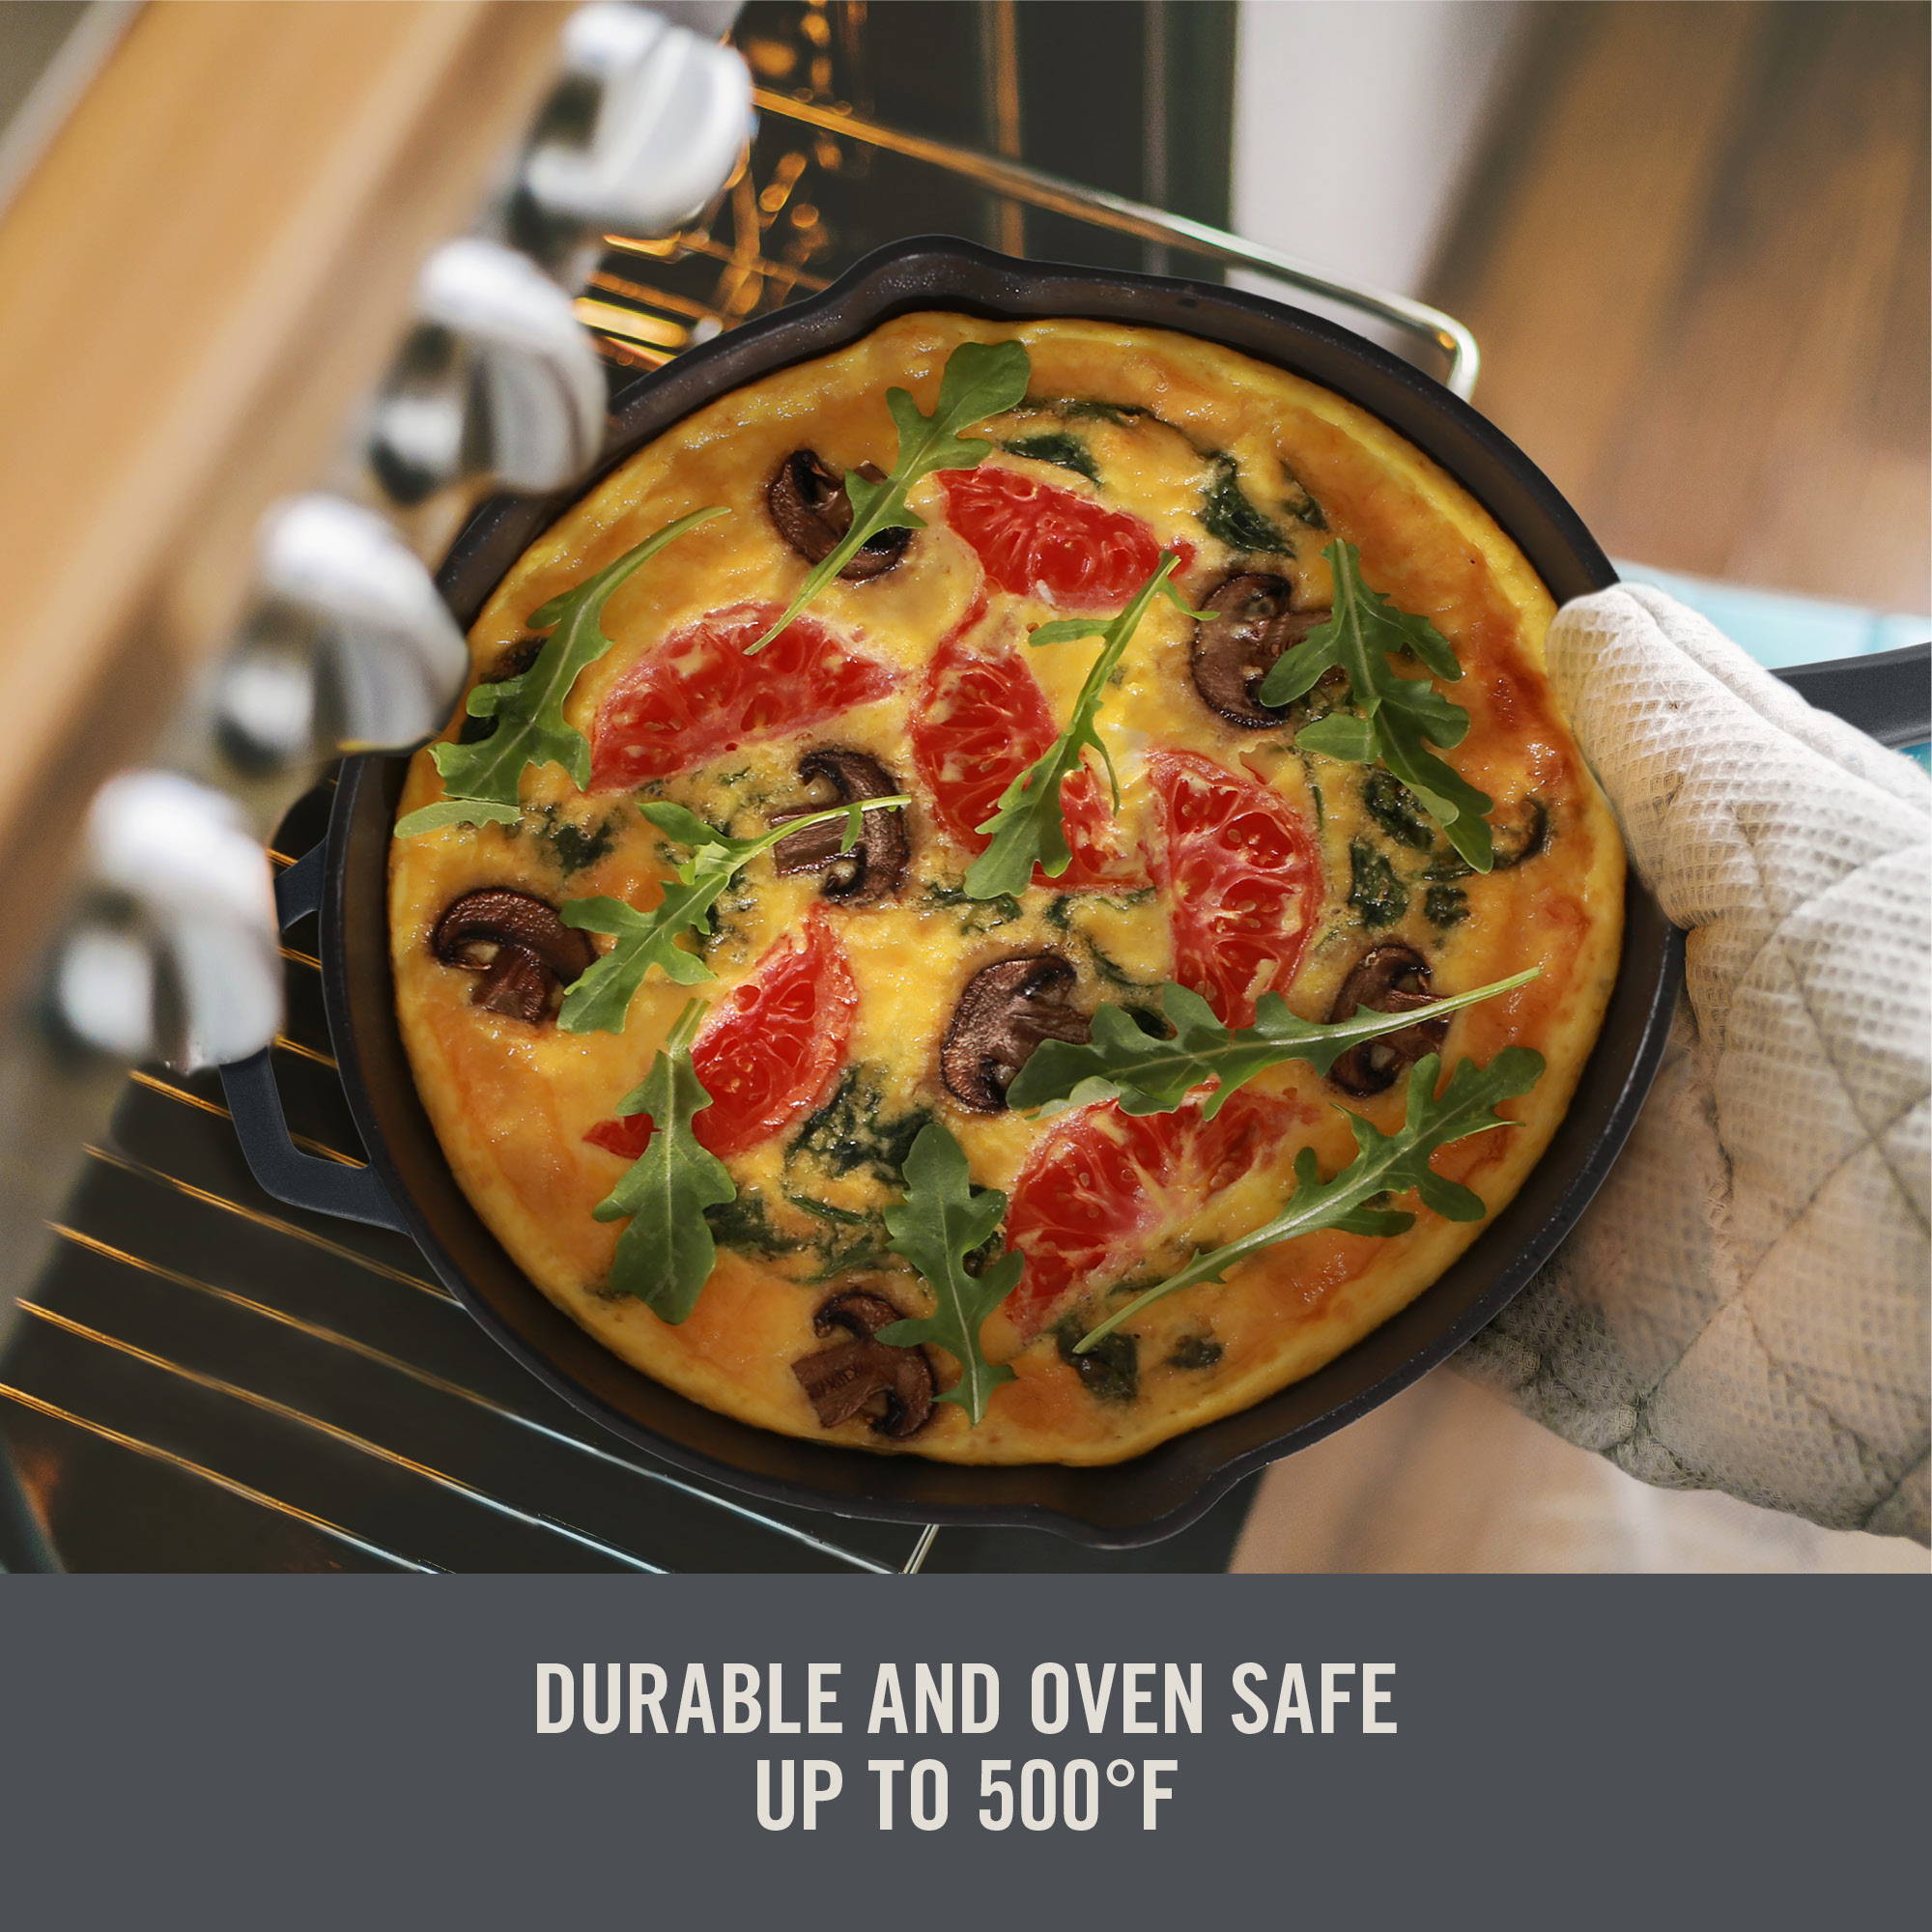 Durable and oven safe up to 500 degrees F